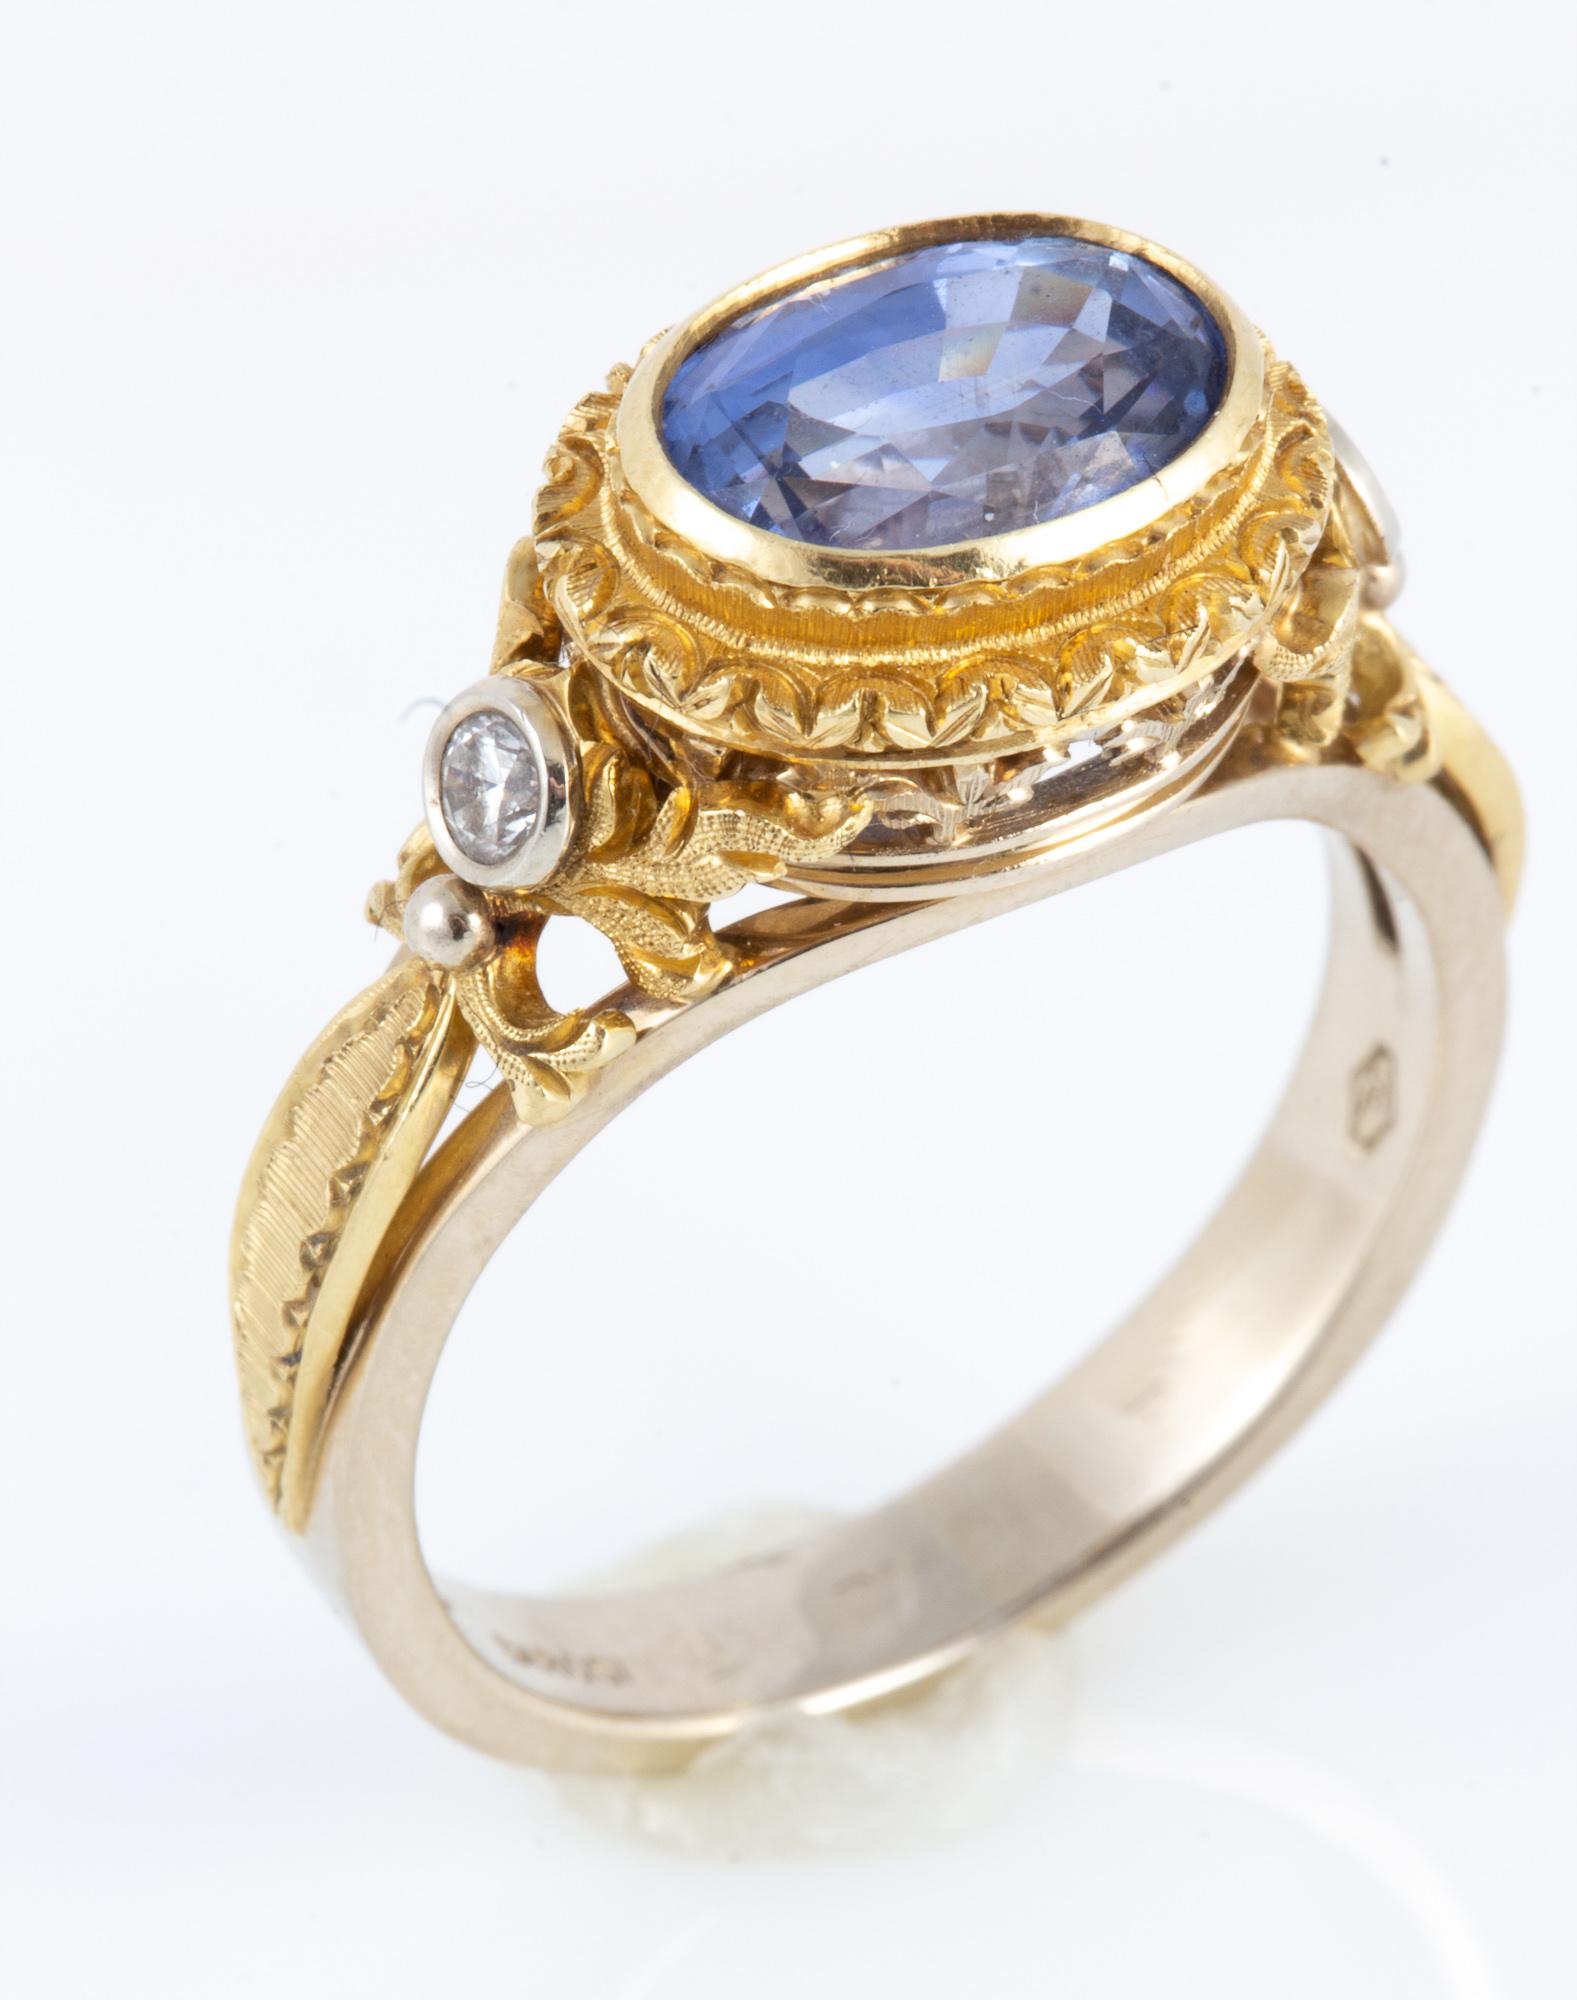 Hand carved and hand engraved two tone 18 kt Gold ring with beautifully cut oval medium blue Ceylon Sapphire flanked by diamonds in an old world setting making it a most romantic piece.

Created by noted jewelry designer David Meelheim Designs, 